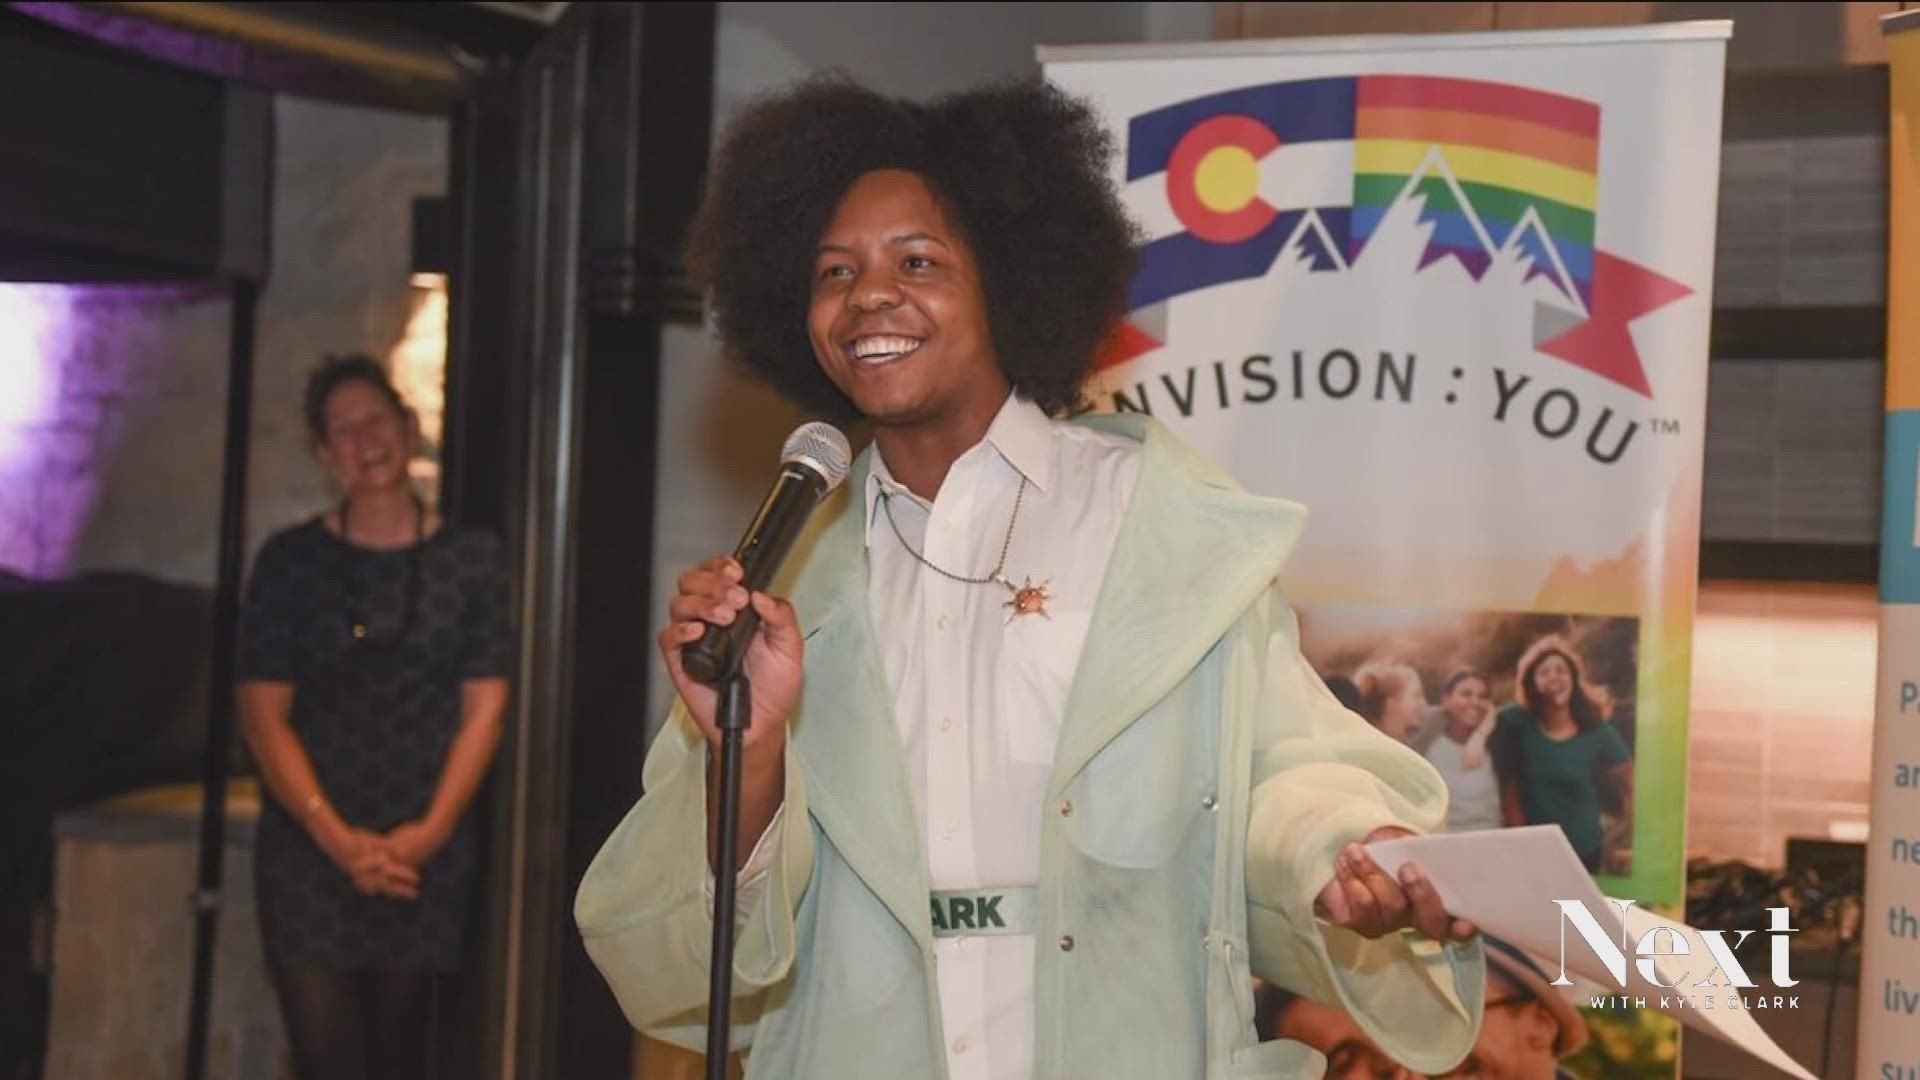 Envision:You addresses mental health challenges facing LGBTQ+ Coloradans. Programs include helping young people communicate with families, peer support and more.